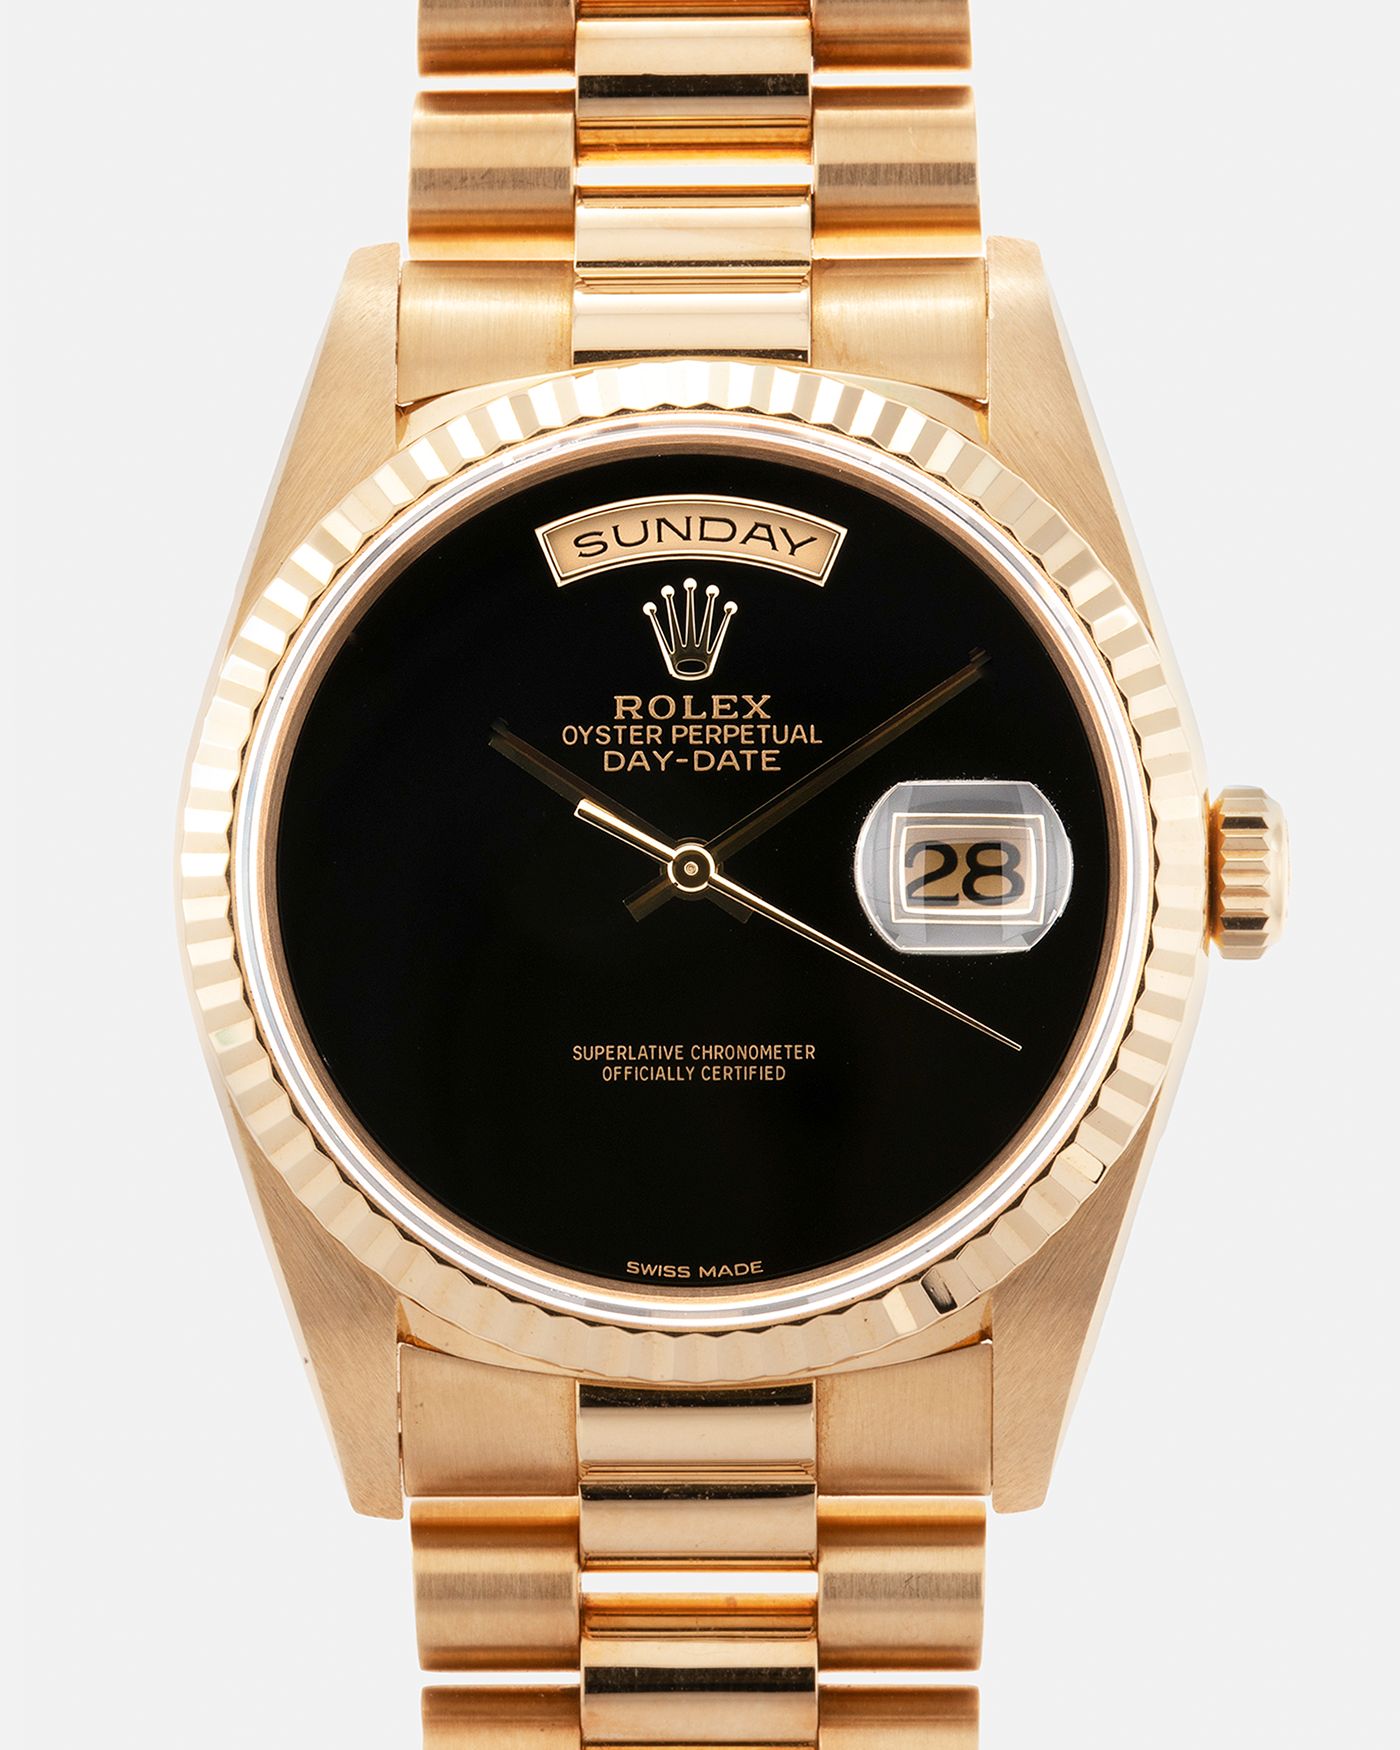 Brand: Rolex Year: 1996 Model: Day Date Reference Number: 18238 Serial Number: W409XXX Material: 18-carat Yellow Gold, Black Onyx Dial Movement: Rolex Cal. 3155, Self-Winding Case Diameter: 36mm Lug Width: 20mm Bracelet: Rolex 18-carat Yellow Gold 8385 Presidential Bracelet with 55B Curved End Links